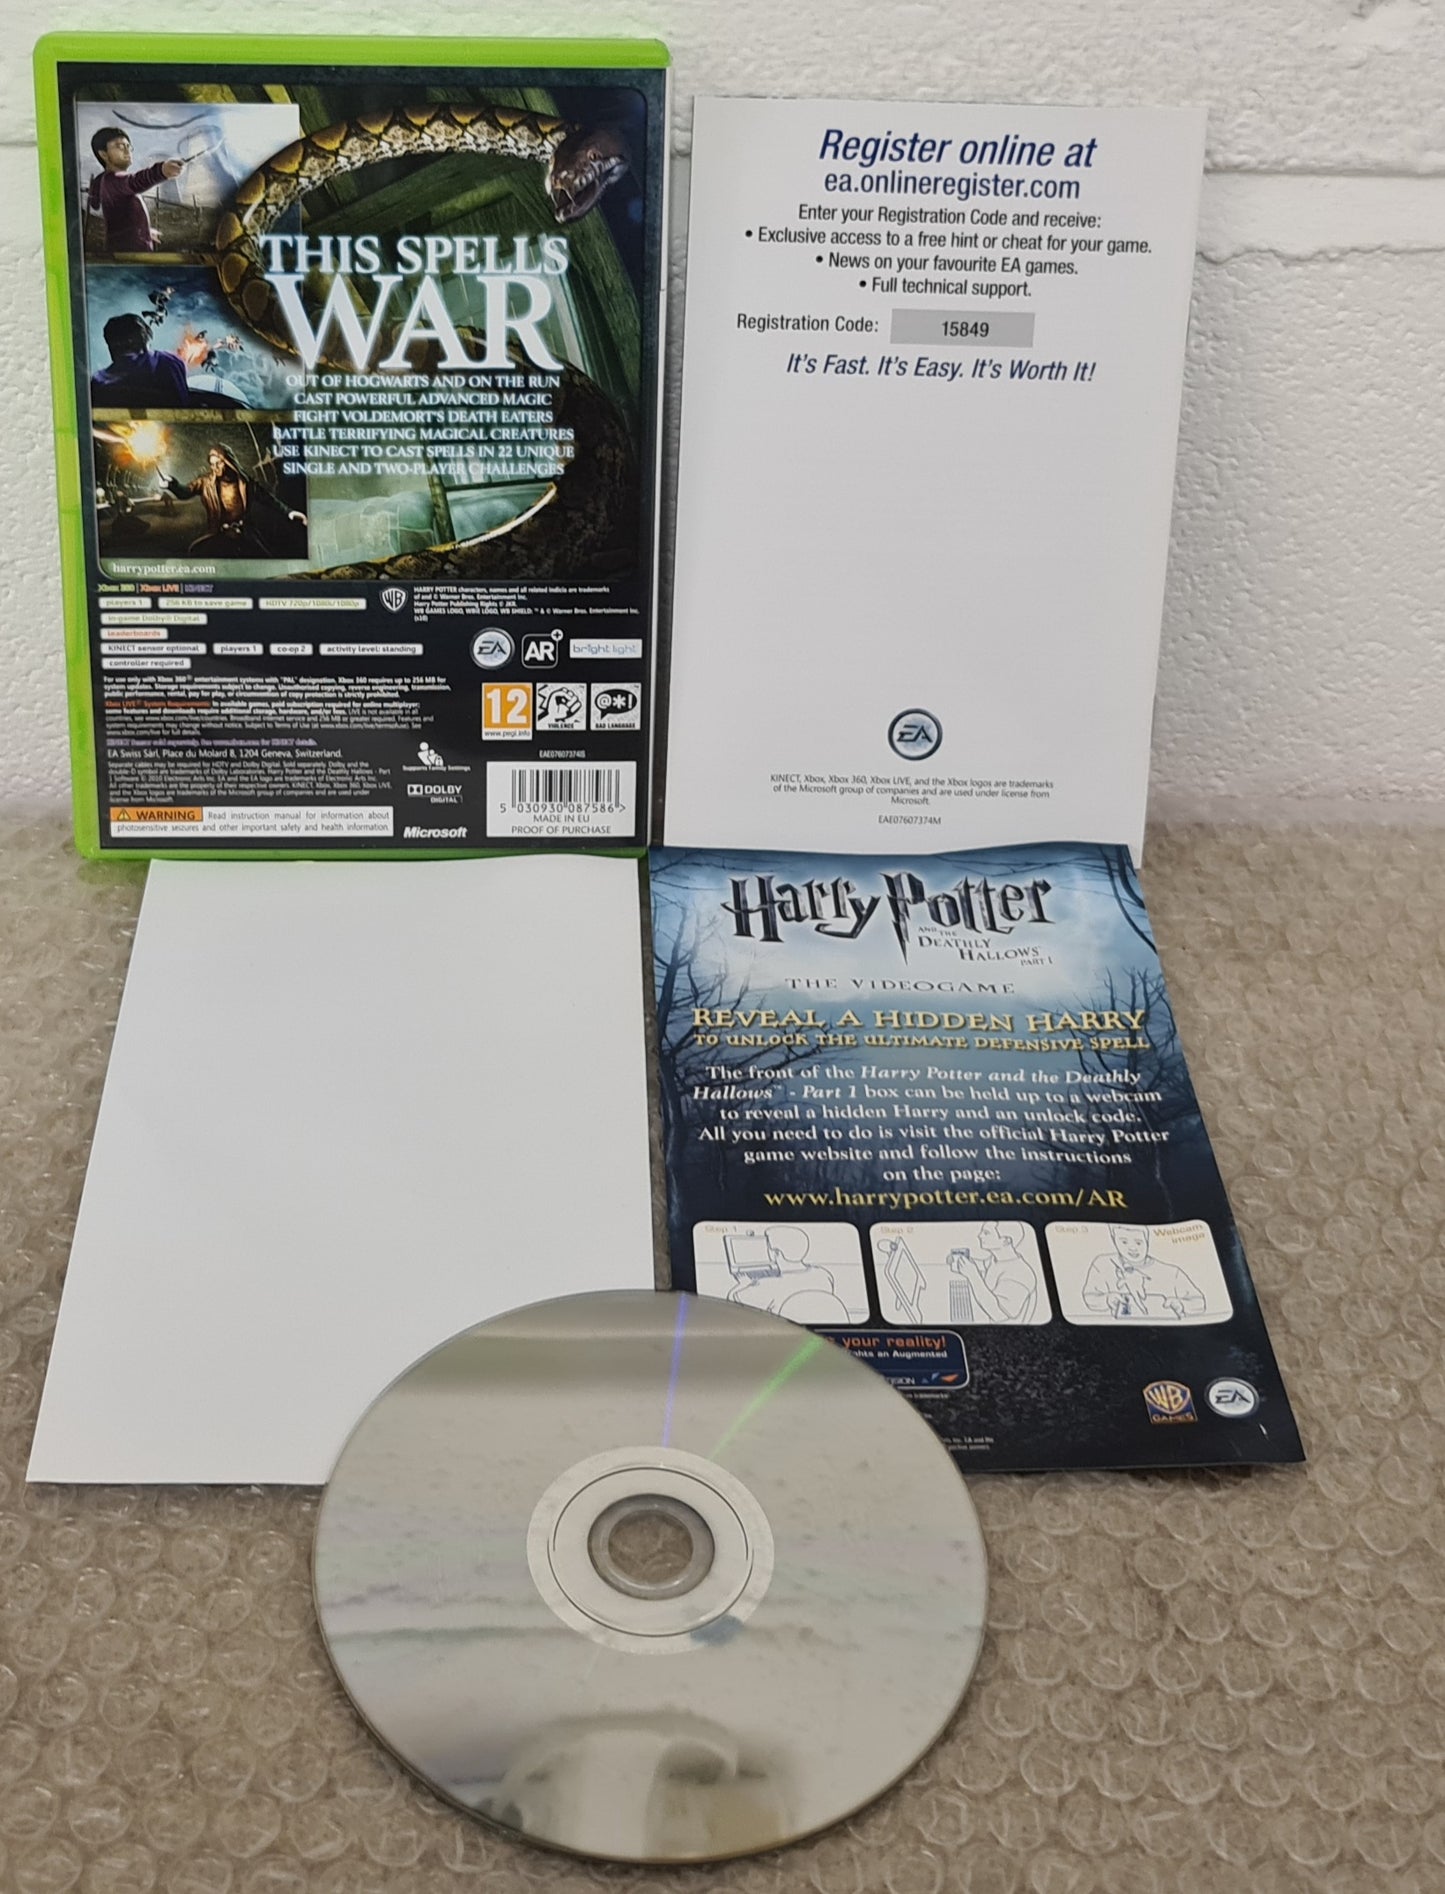 Harry Potter and the Deathly Hallows Part 1 Microsoft Xbox 360